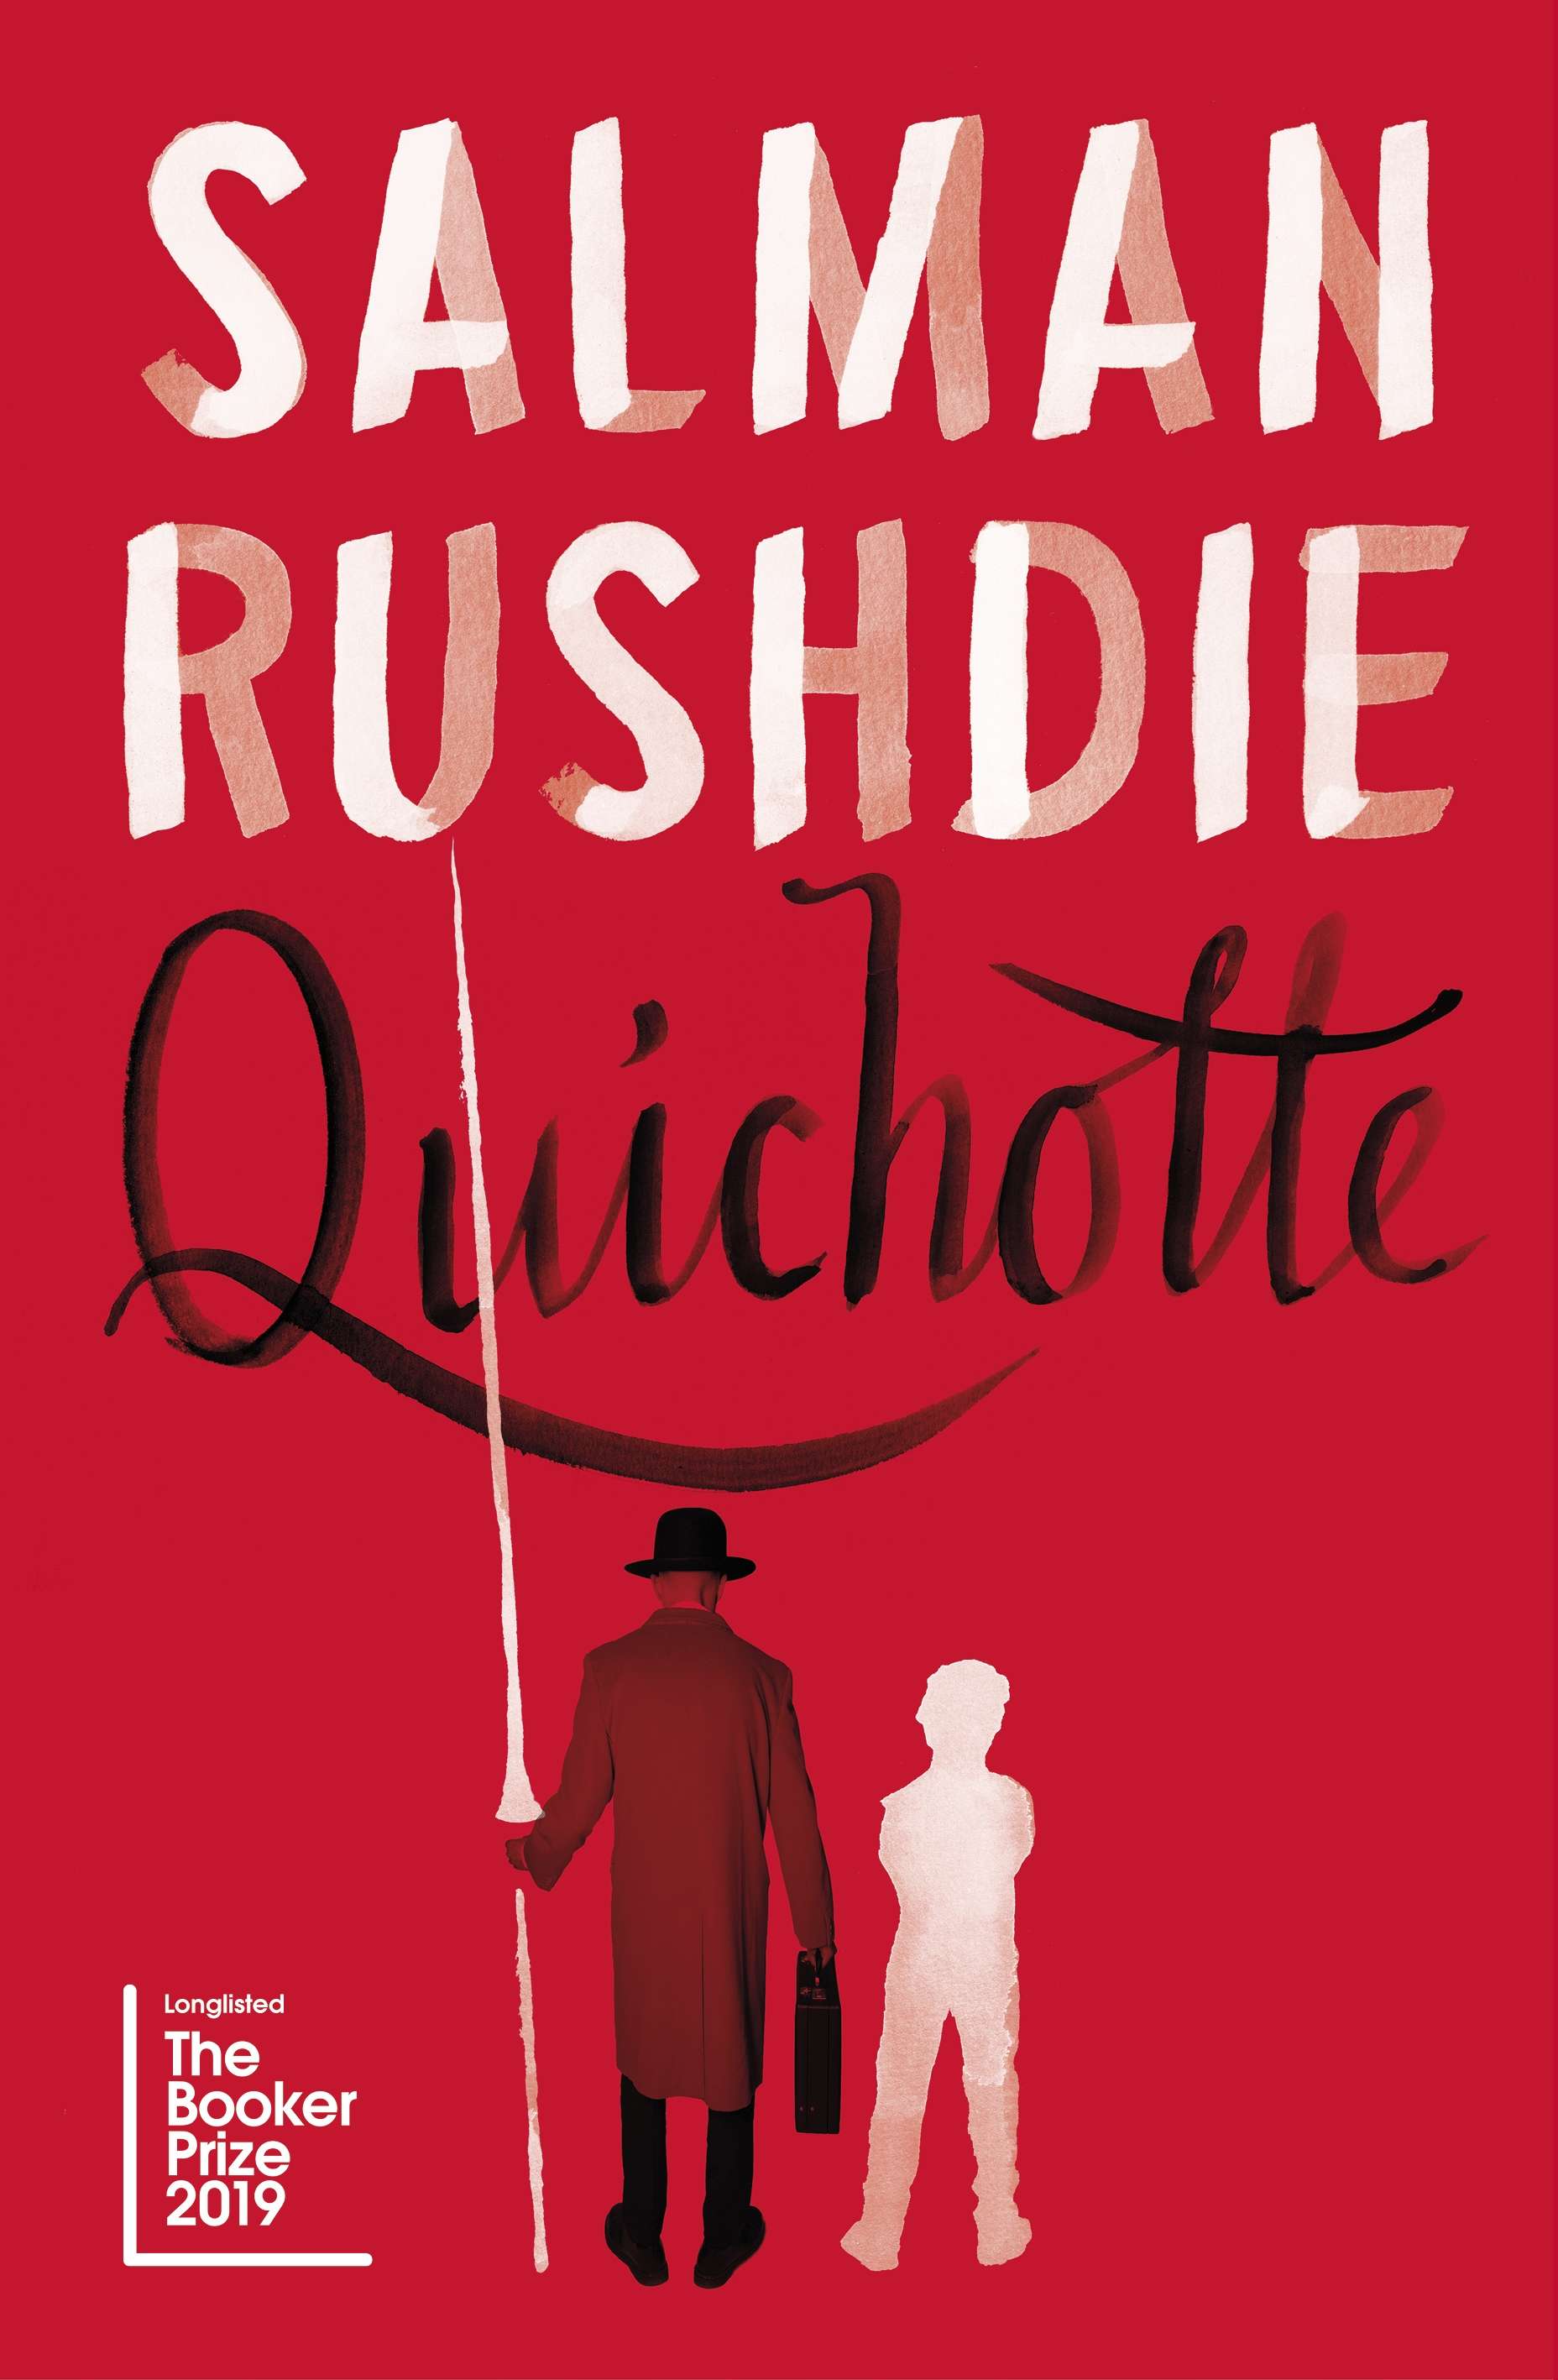 Quichotte by Salman Rushdie book cover featuring a man in a bowler hat and long coat and the outline of a child